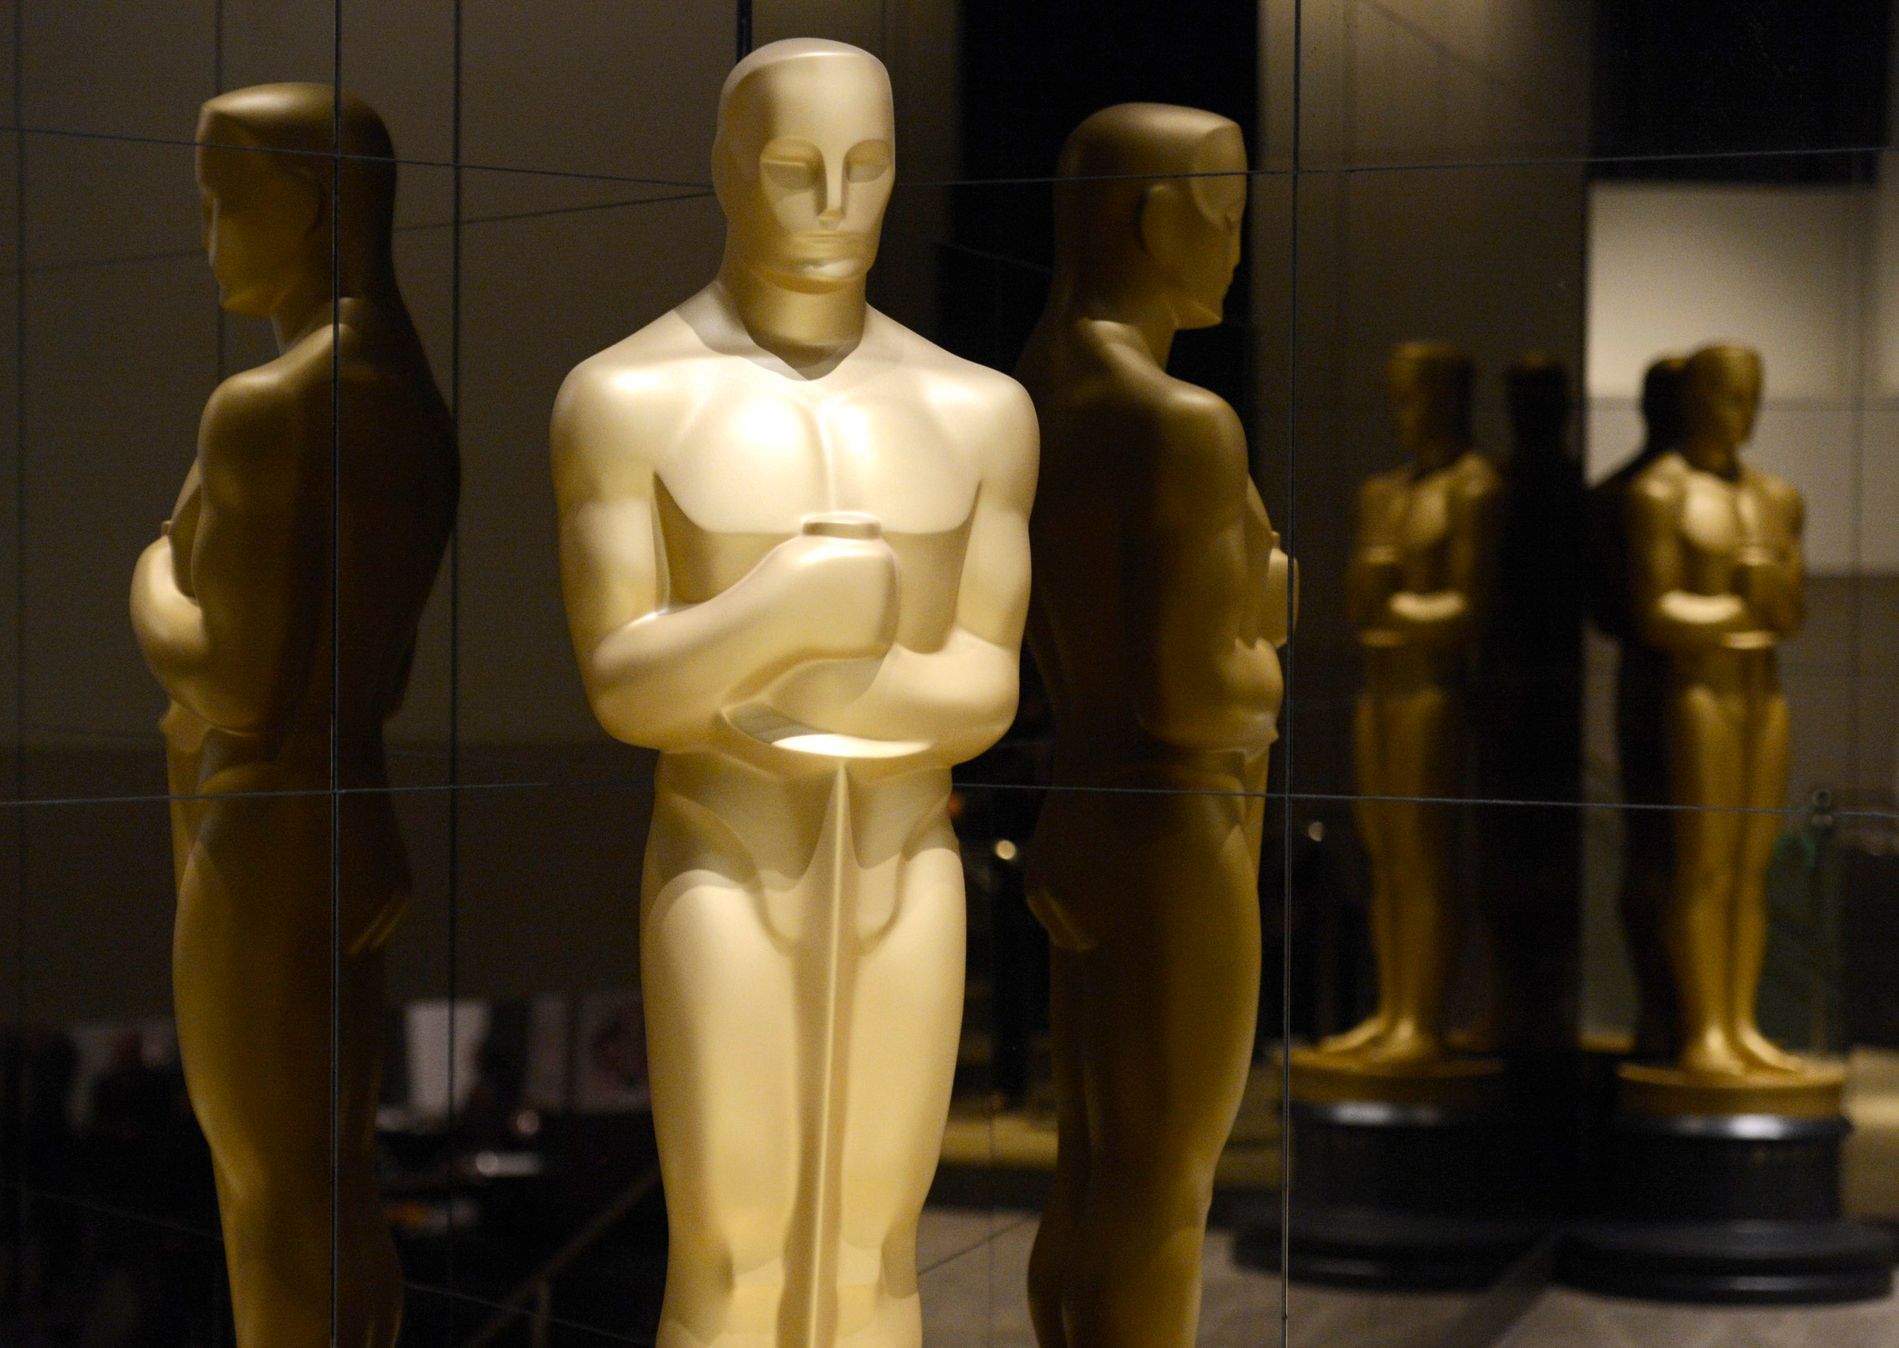 An Oscar statue is seen at the nominations announcement for the 87th Academy Awards in Beverly Hills, California